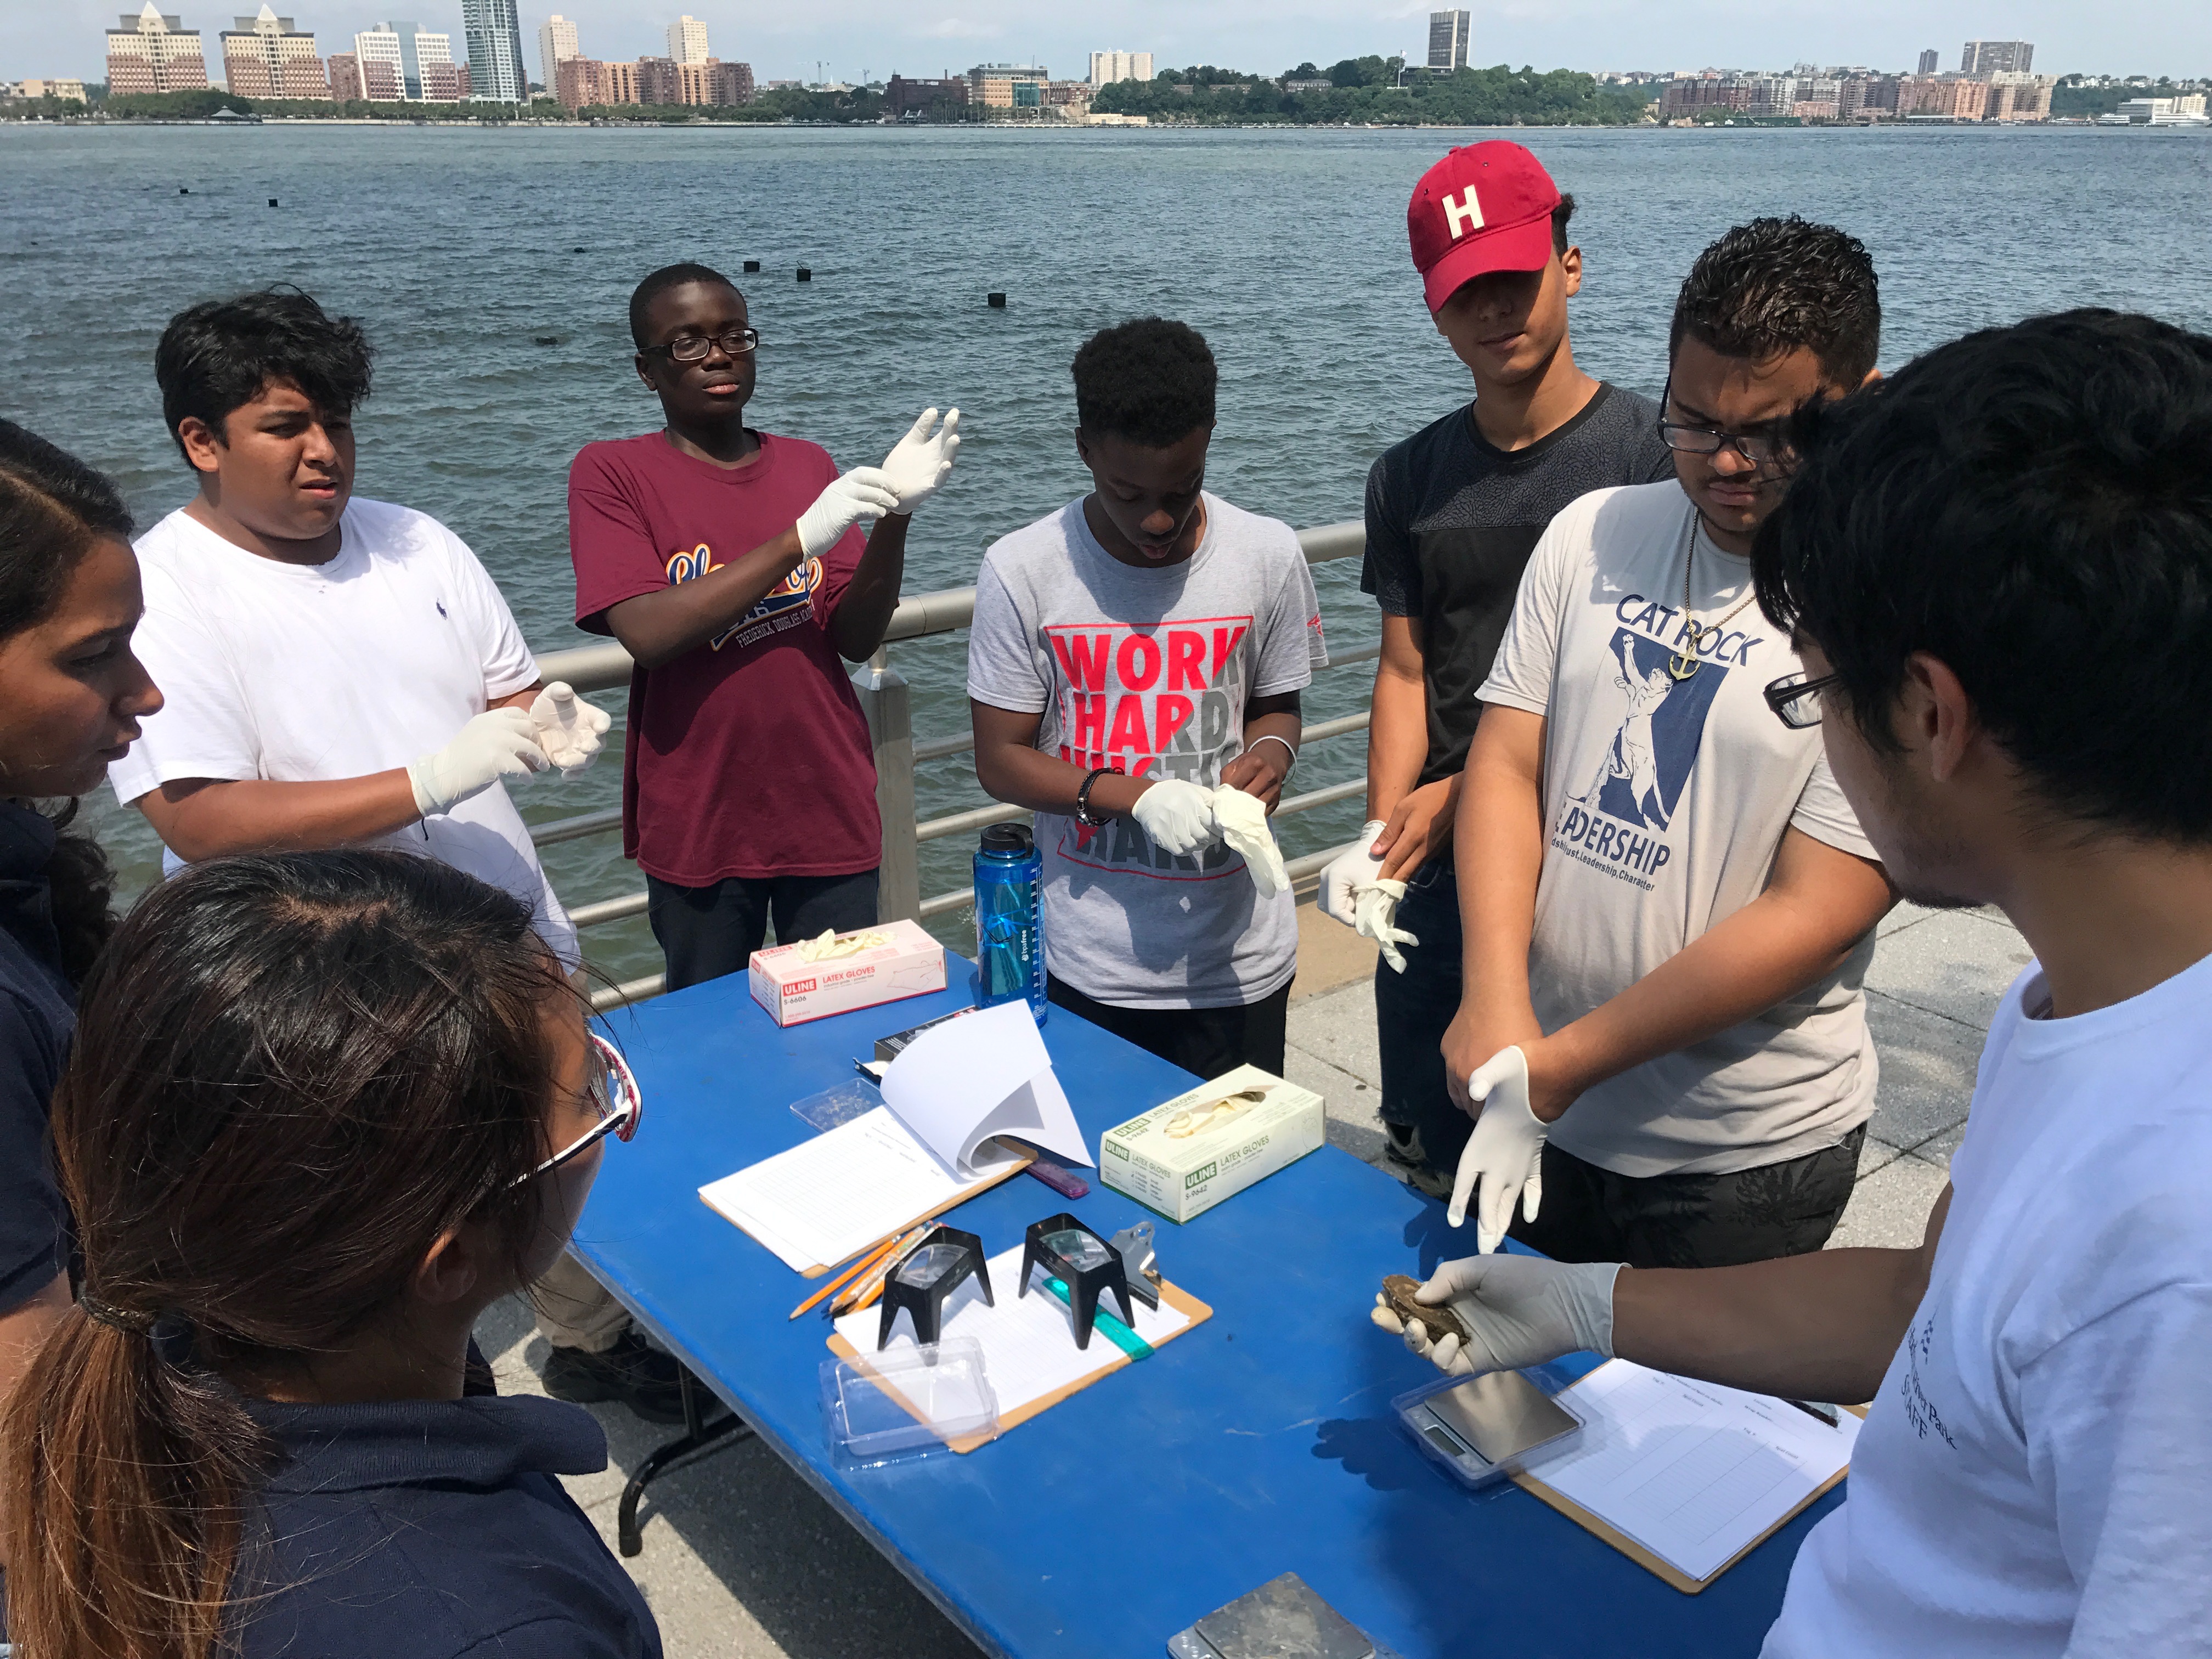 NYC ICO participants join an oyster conservation project along the Hudson.